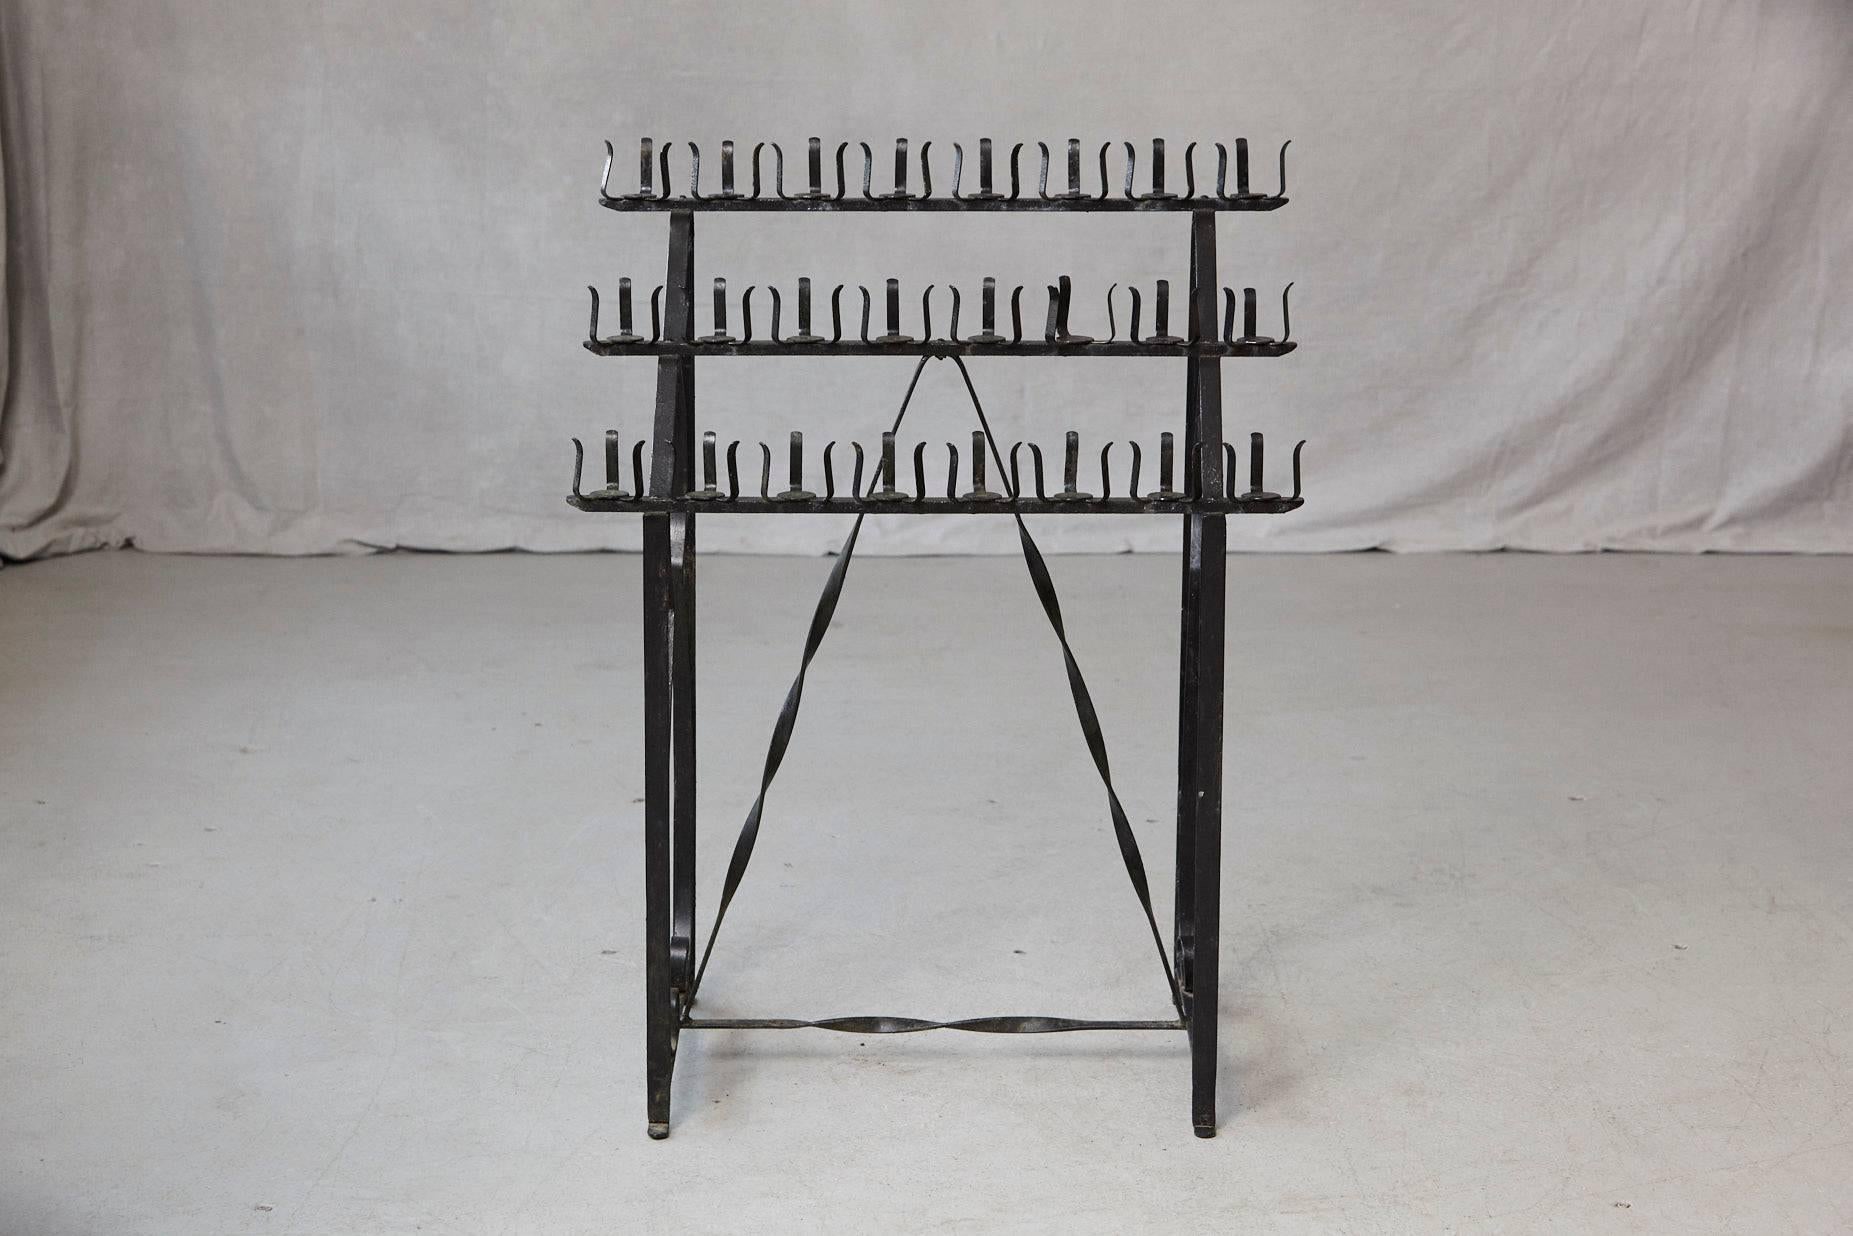 Black wrought iron votive candle stand for 24 candles. 
Very decorative for the garden, makes amazing light or to lit a candle for a lot of sins!
Some light rust at the bottom of the stand, please refer to the photos.